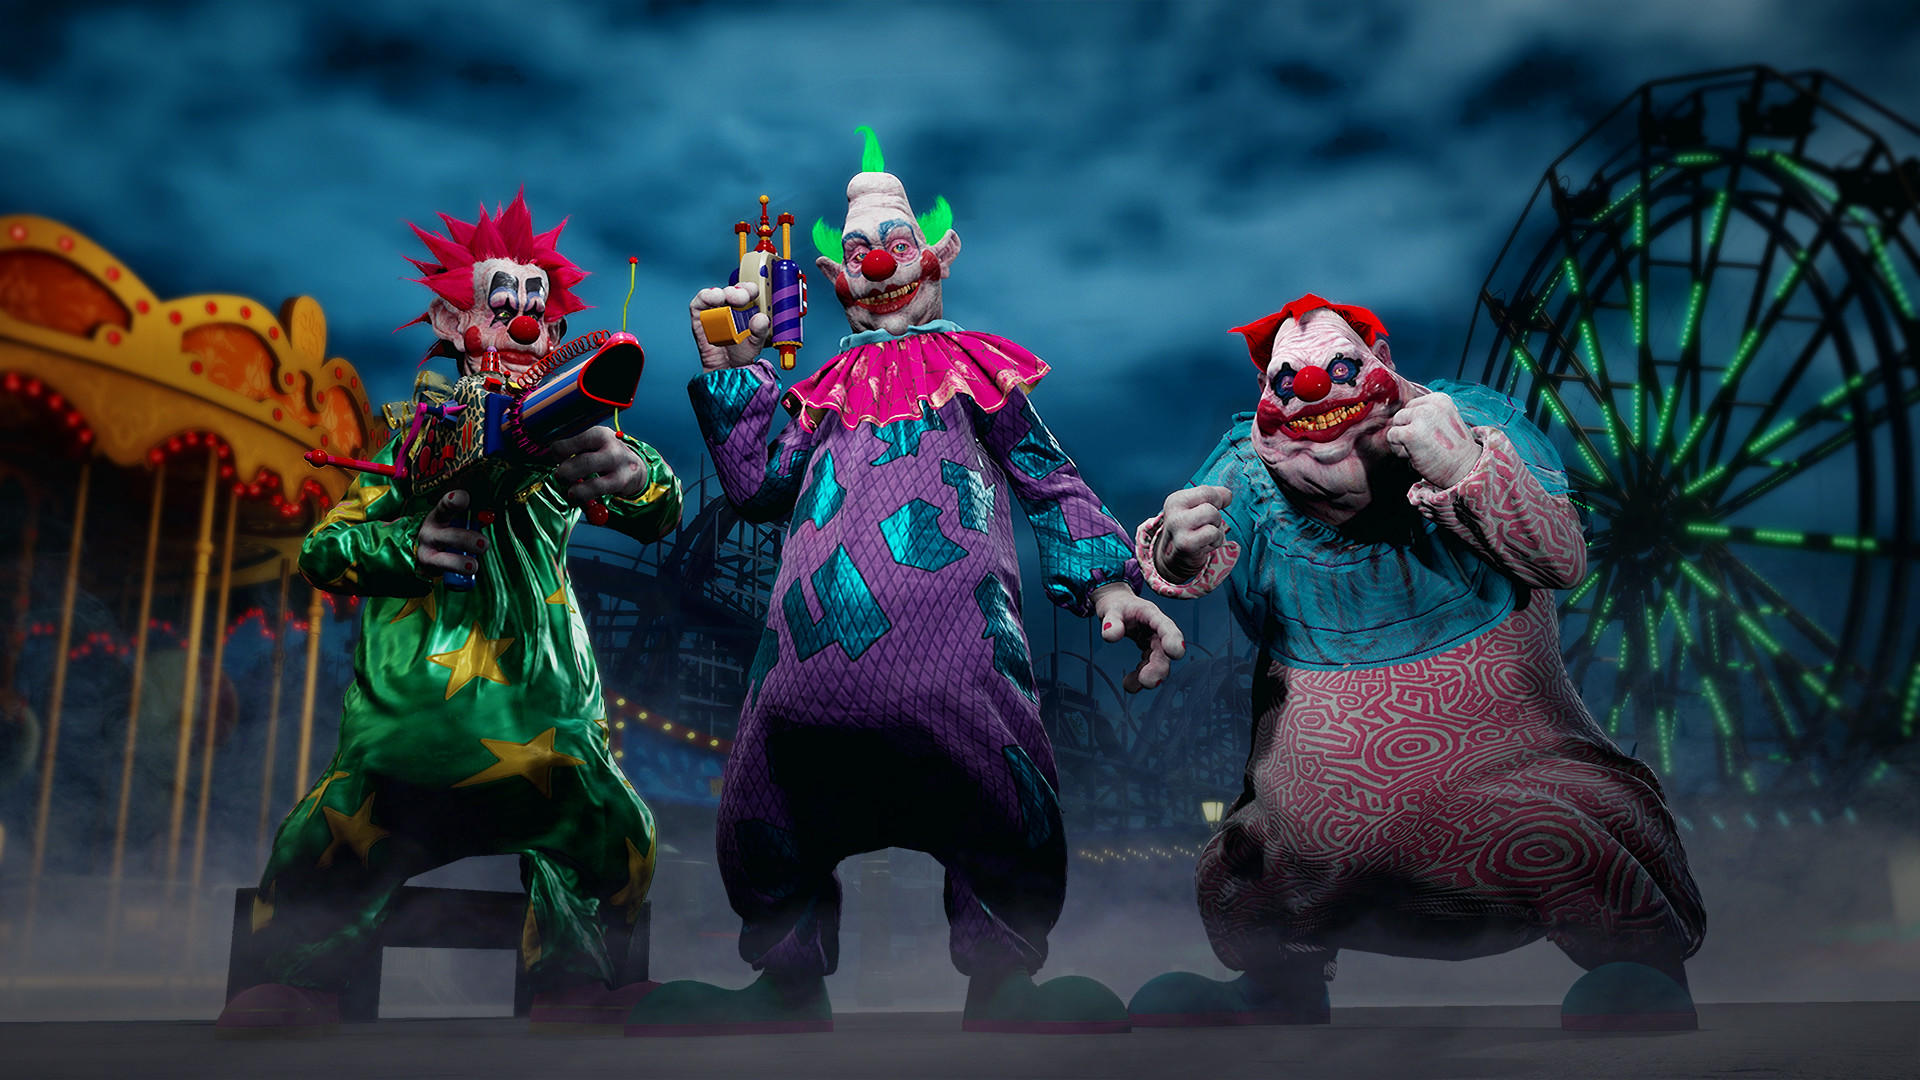 Killer Klowns from Outer Space: The Game 게임 스크린 샷